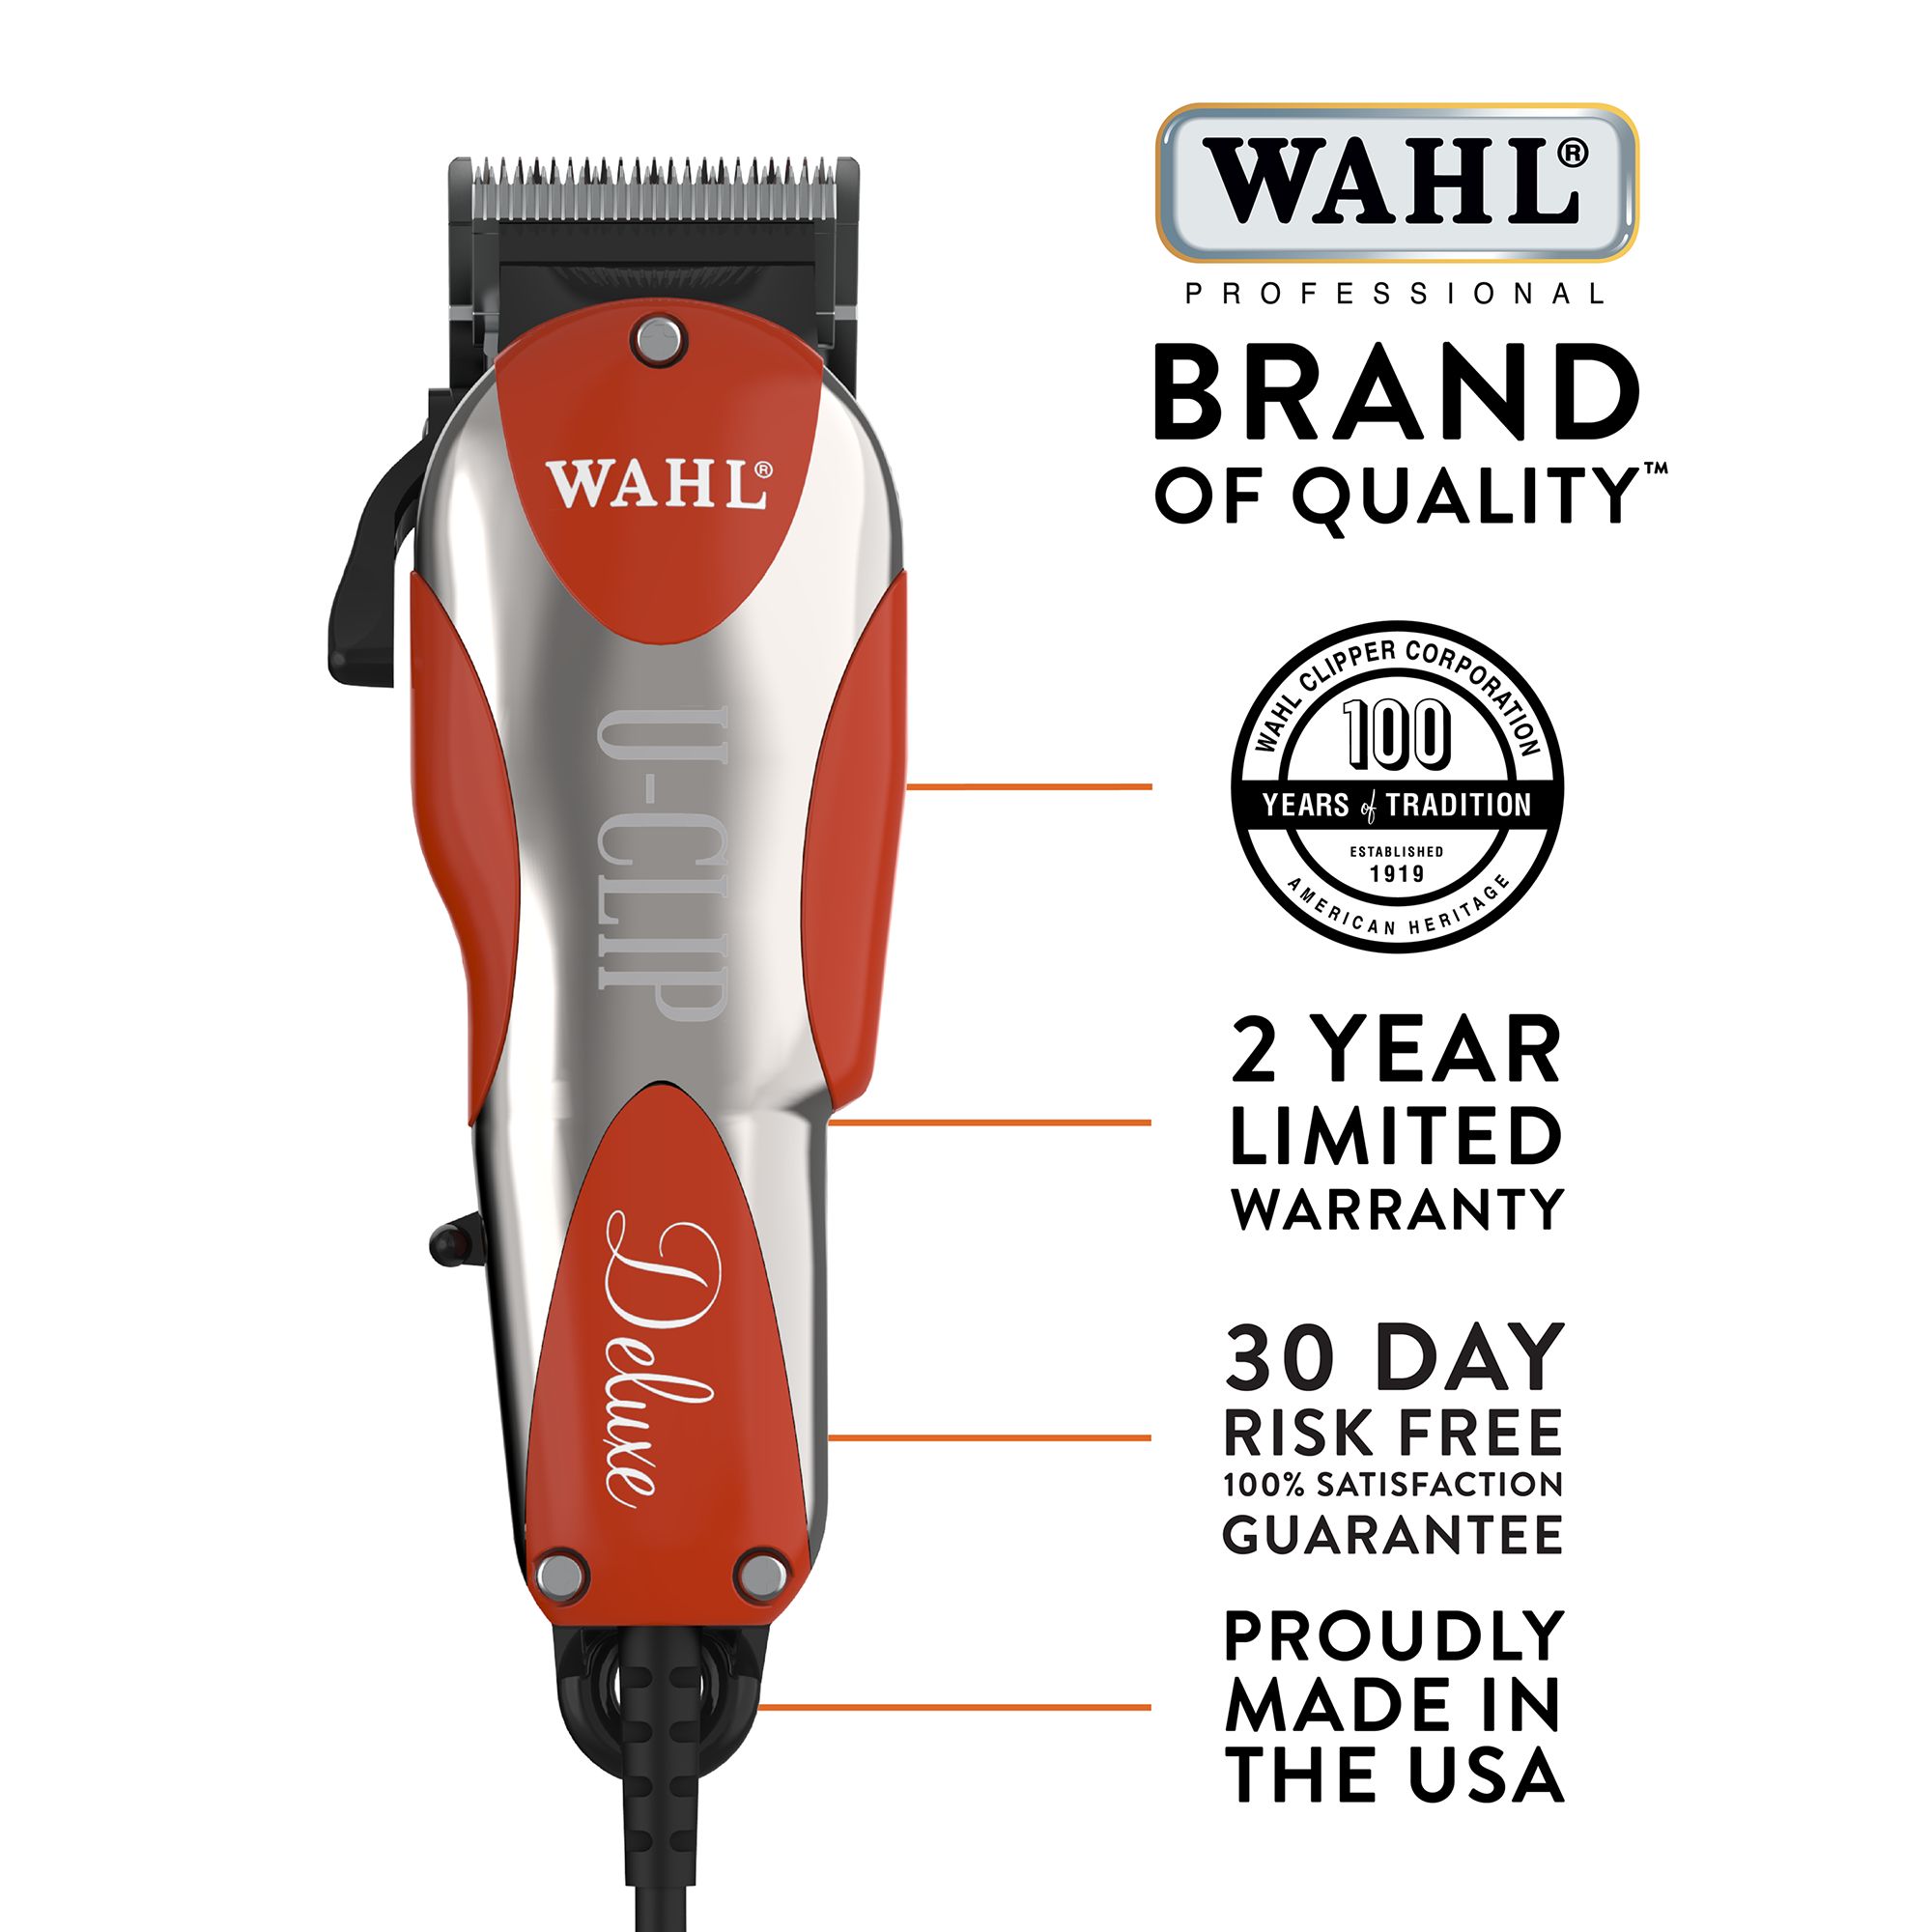 wahl ss pro clippers